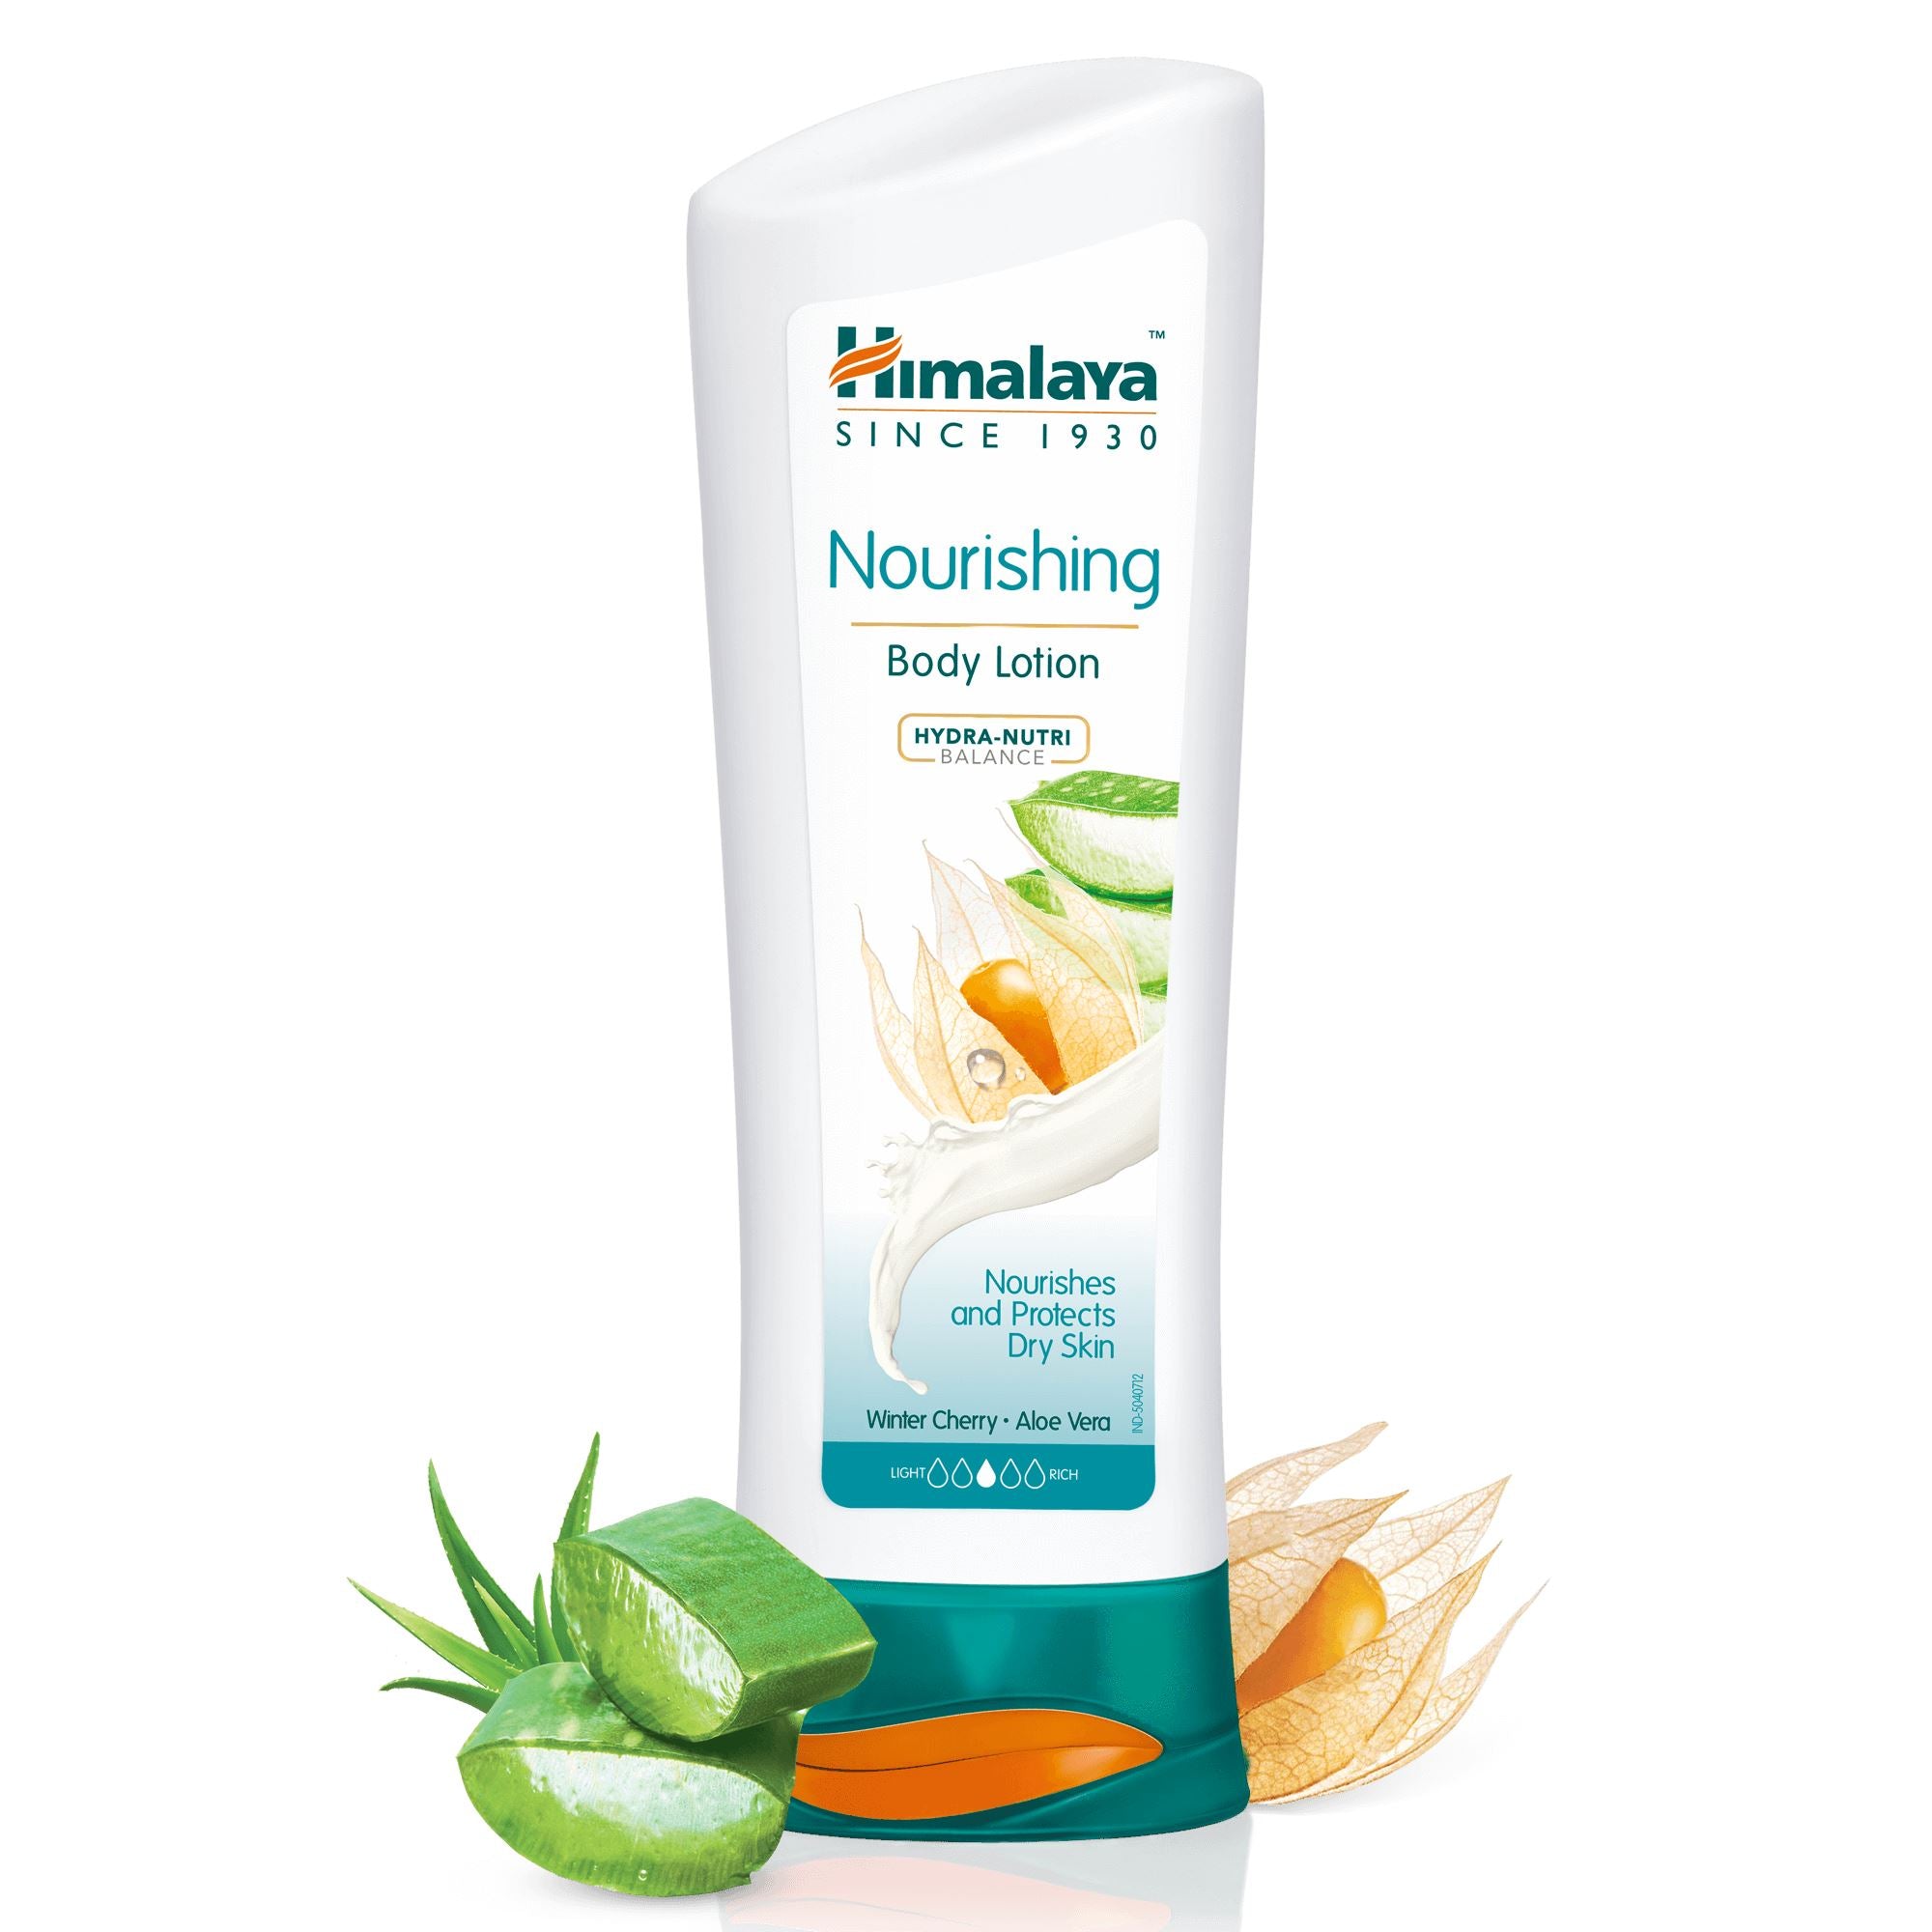 Himalaya Nourishing Body Lotion - Non-greasy body lotion that leaves skin feeling soft and toned